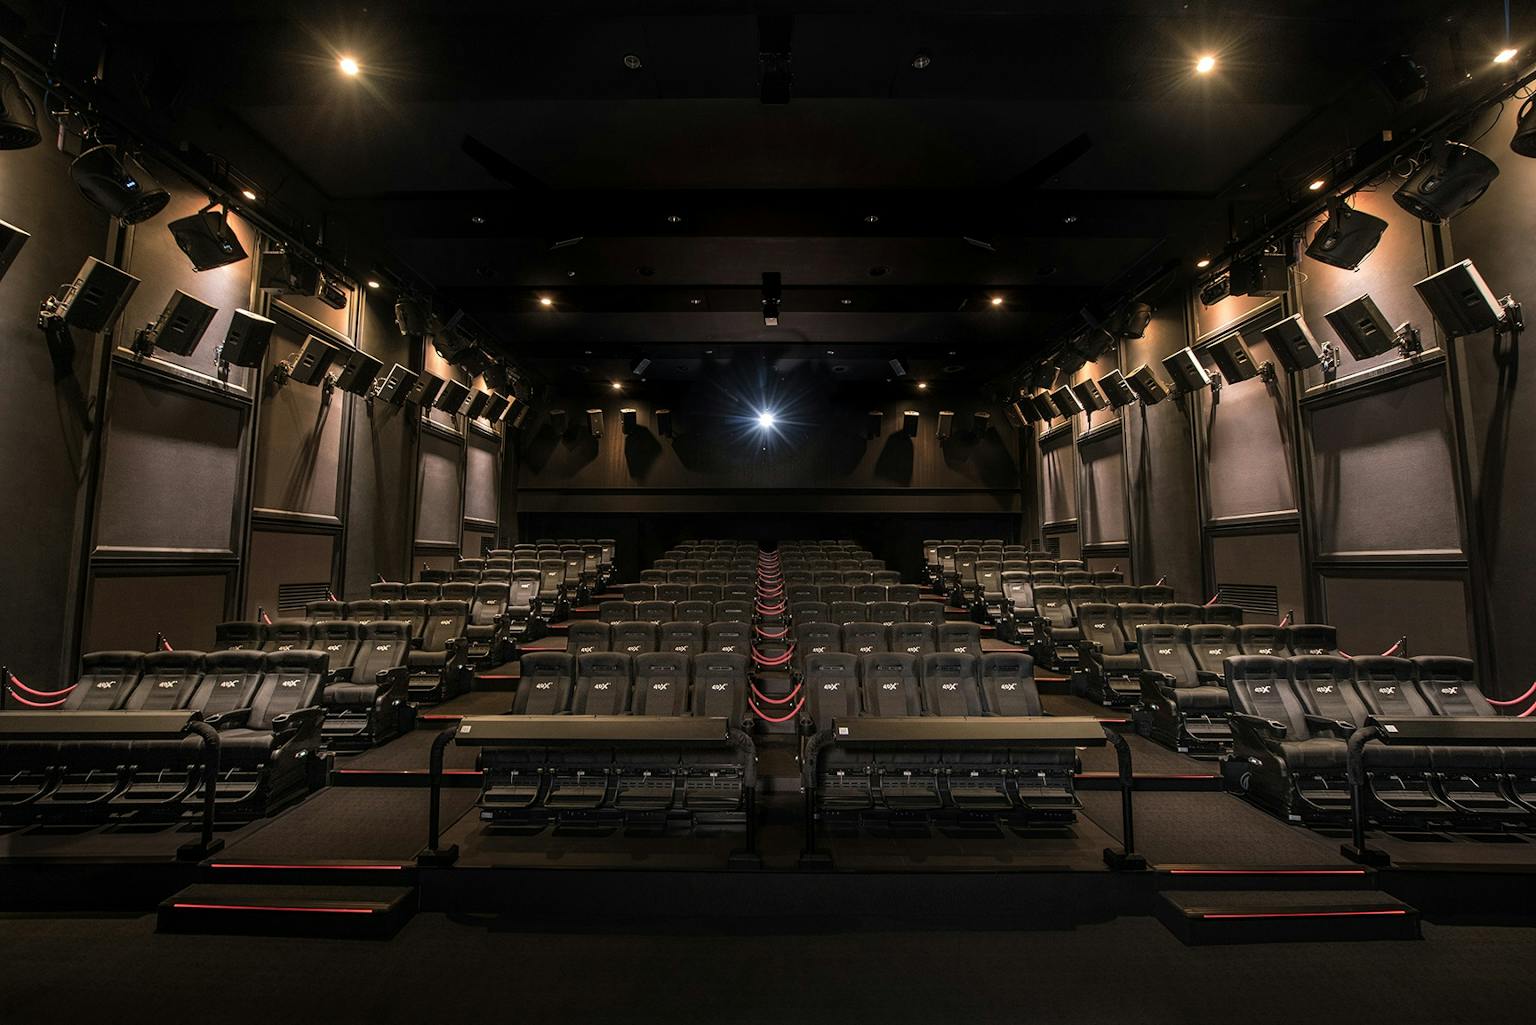 4DX Movies What They Are, How They're Made & What's Next